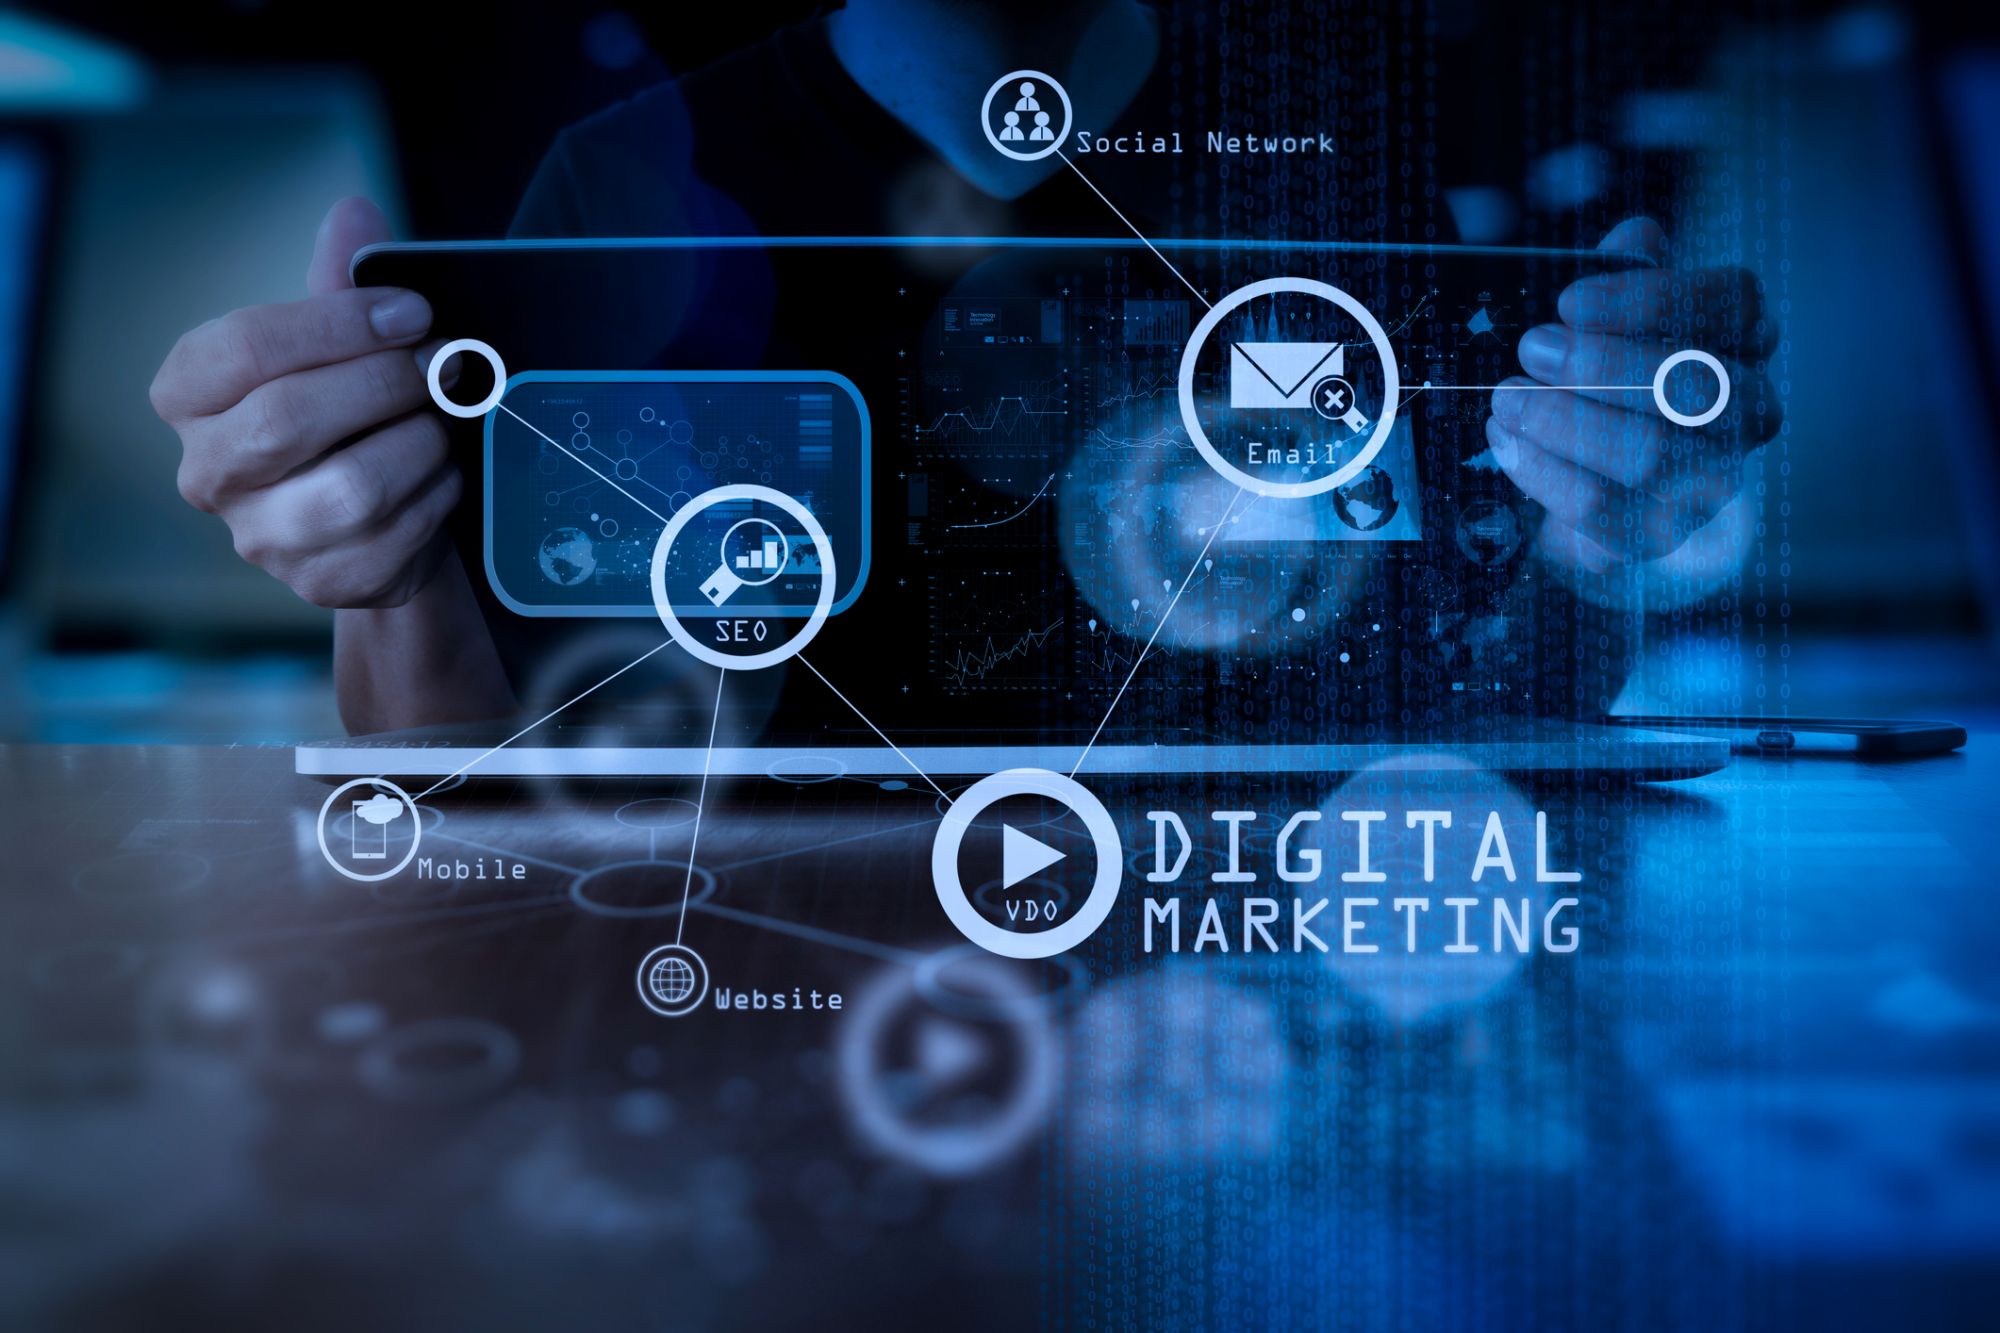 5 Proven Fundamentals of Digital Marketing You Need to Get Right